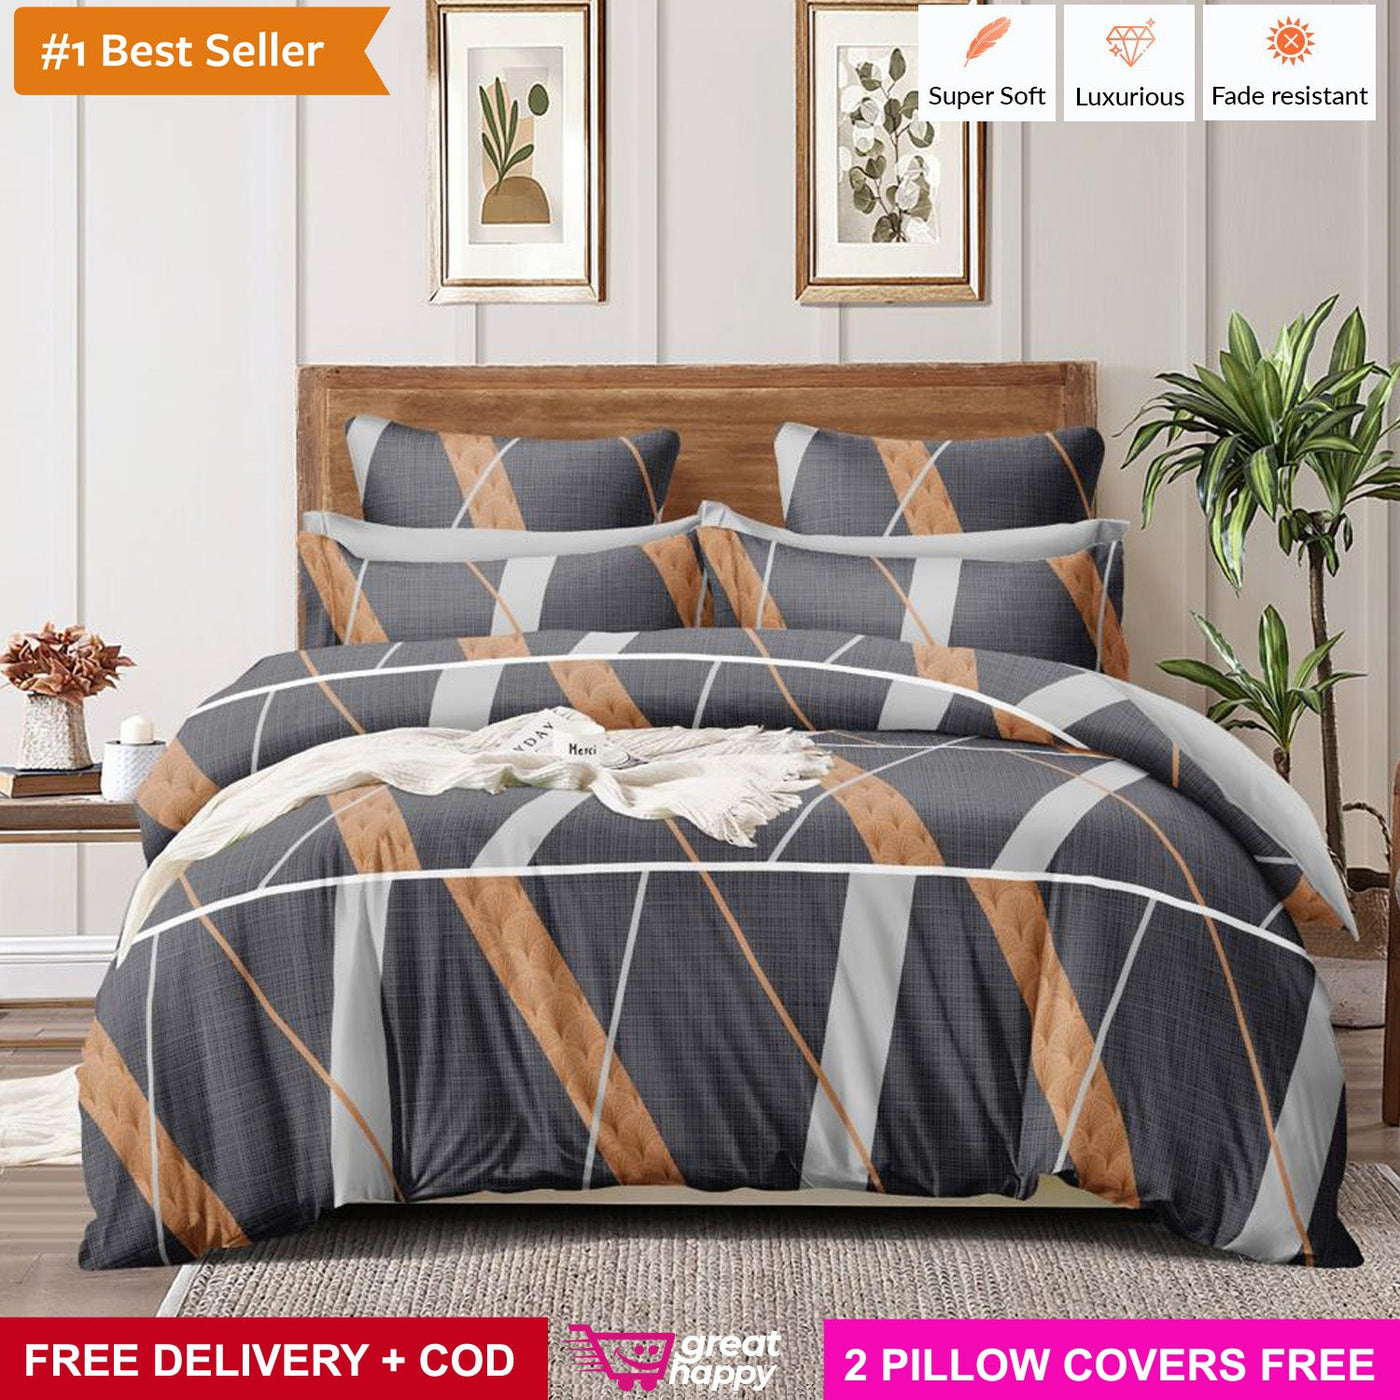 Premium Bedsheet with 2 Pillow Covers - Supersoft & Comfortable Great Happy IN Dark Grey Pattern 